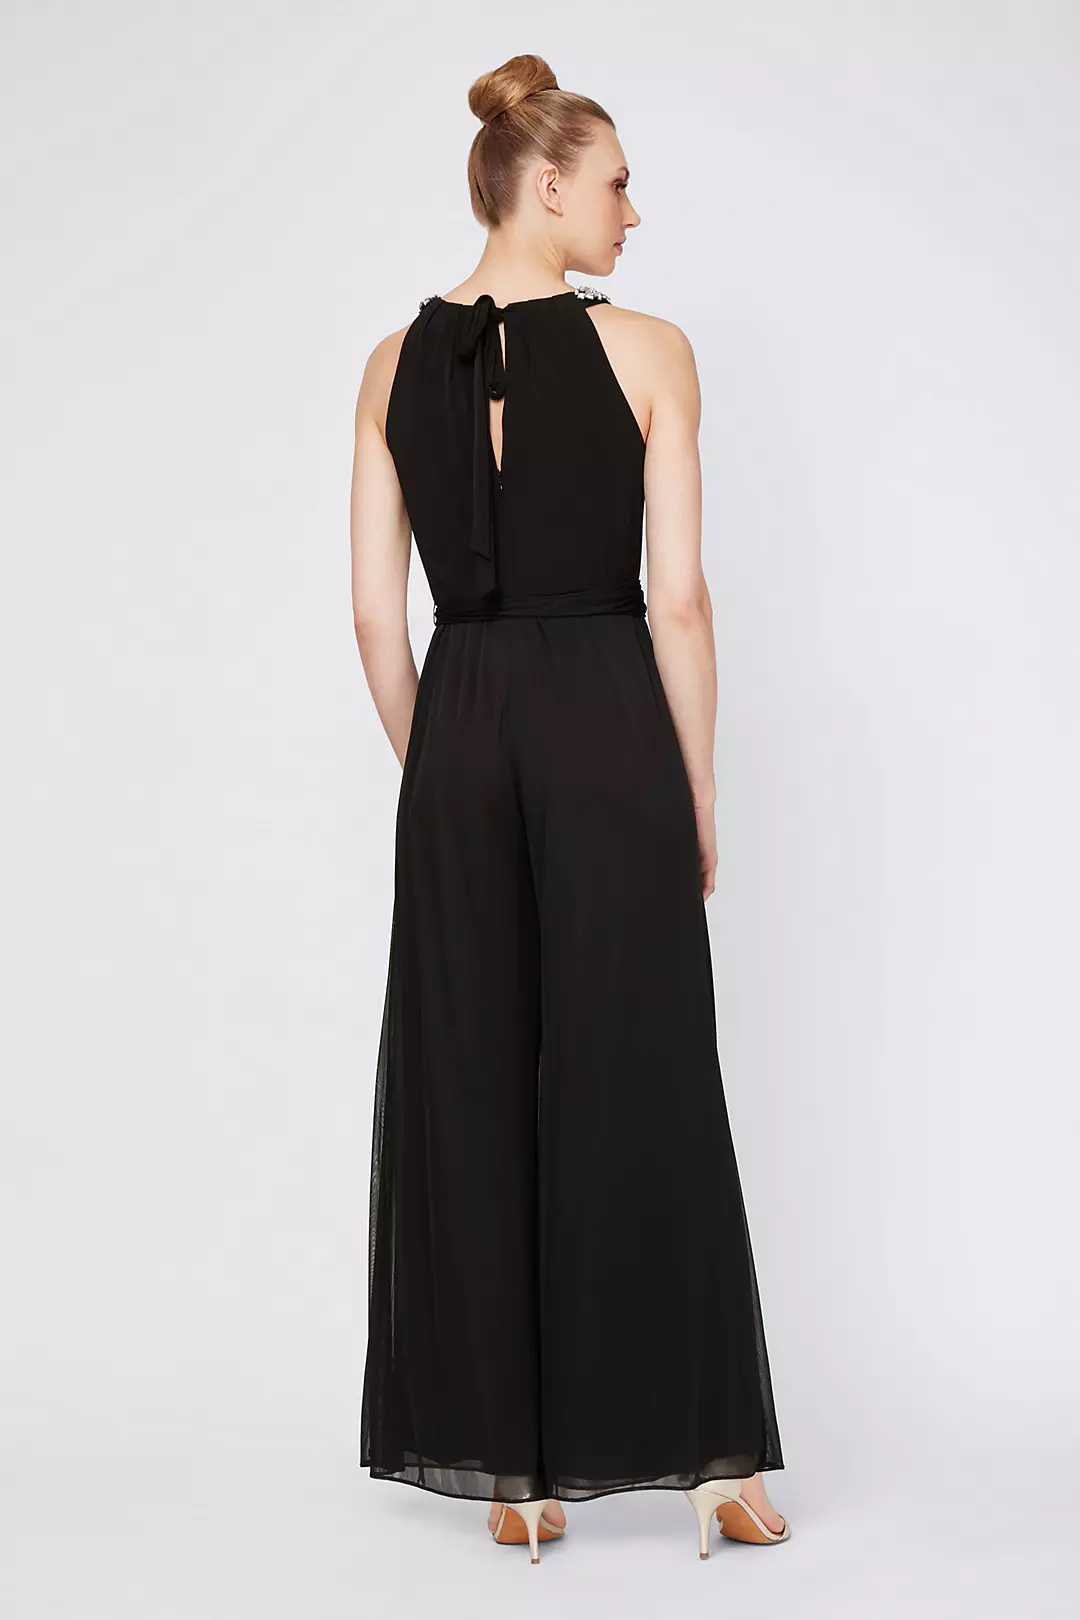 Chiffon Jumpsuit with Beaded Neckline and Sash Image 2